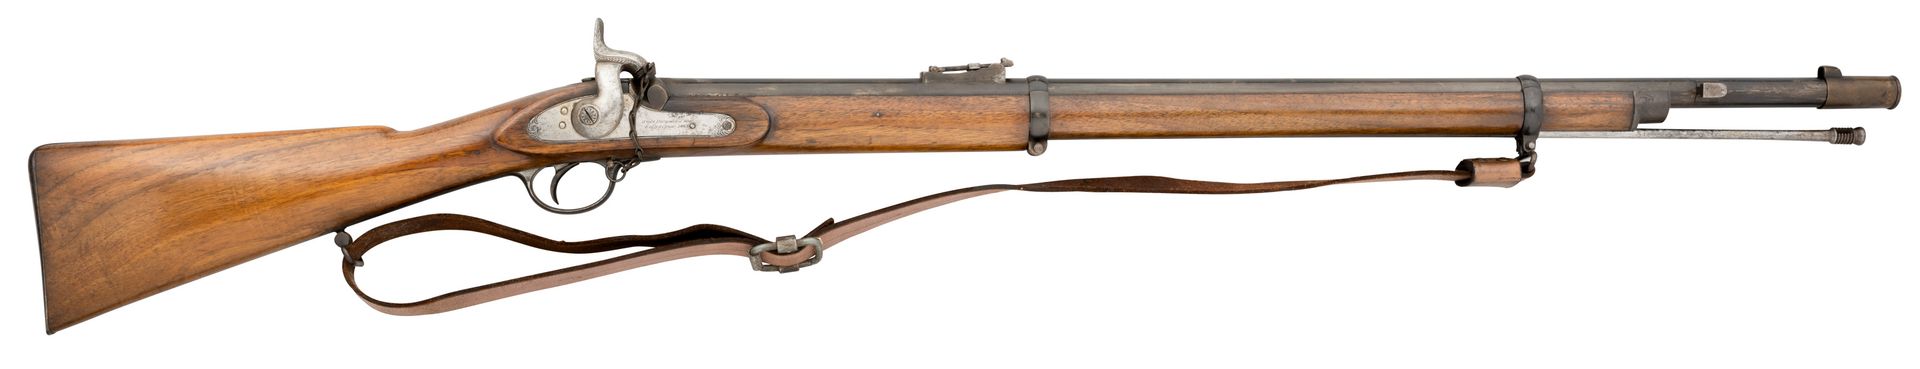 A .577 CALIBRE PERCUSSION MILITARY RIFLE BY JOHN DICKSON AND SONS A .RIFLE MILIT&hellip;